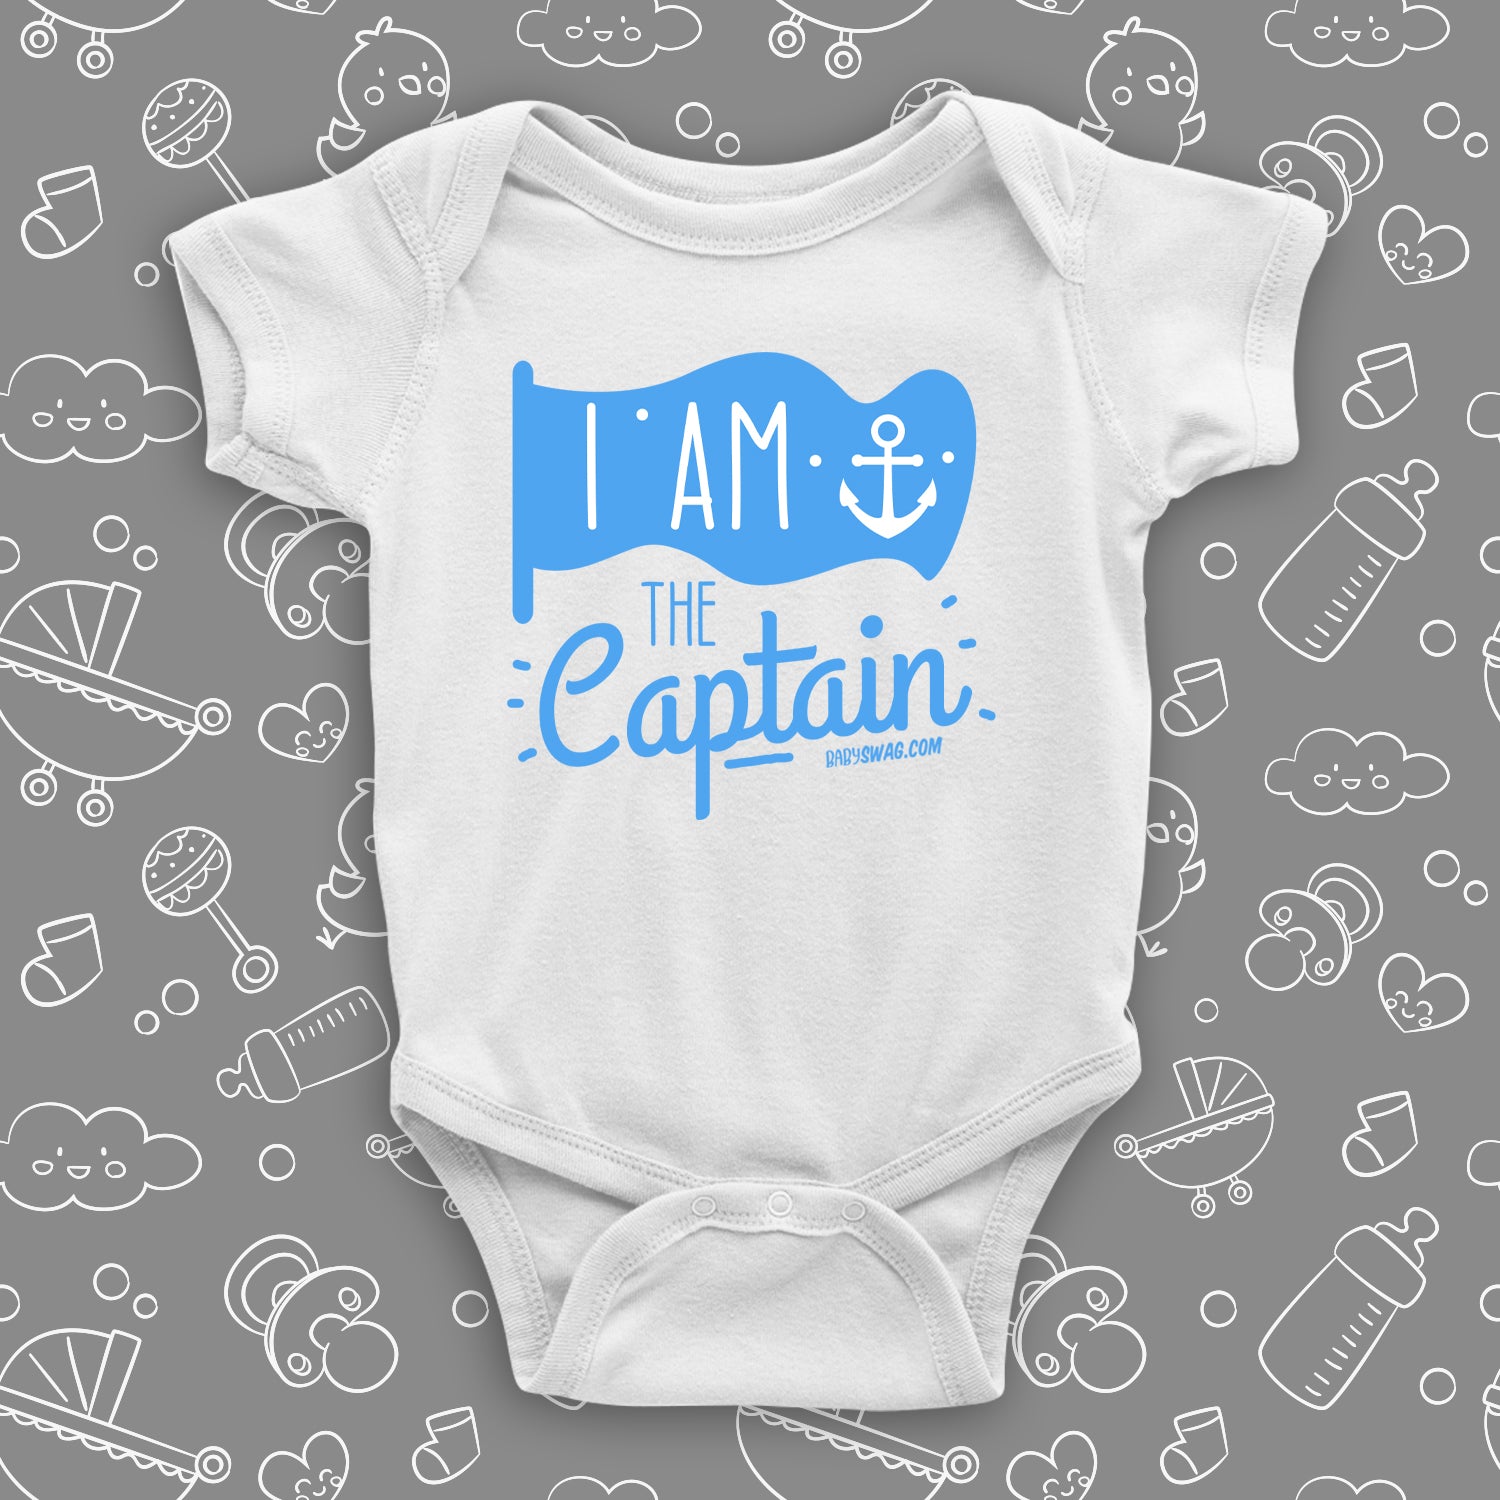 The ''I Am The Captain'' badass baby clothes in white.